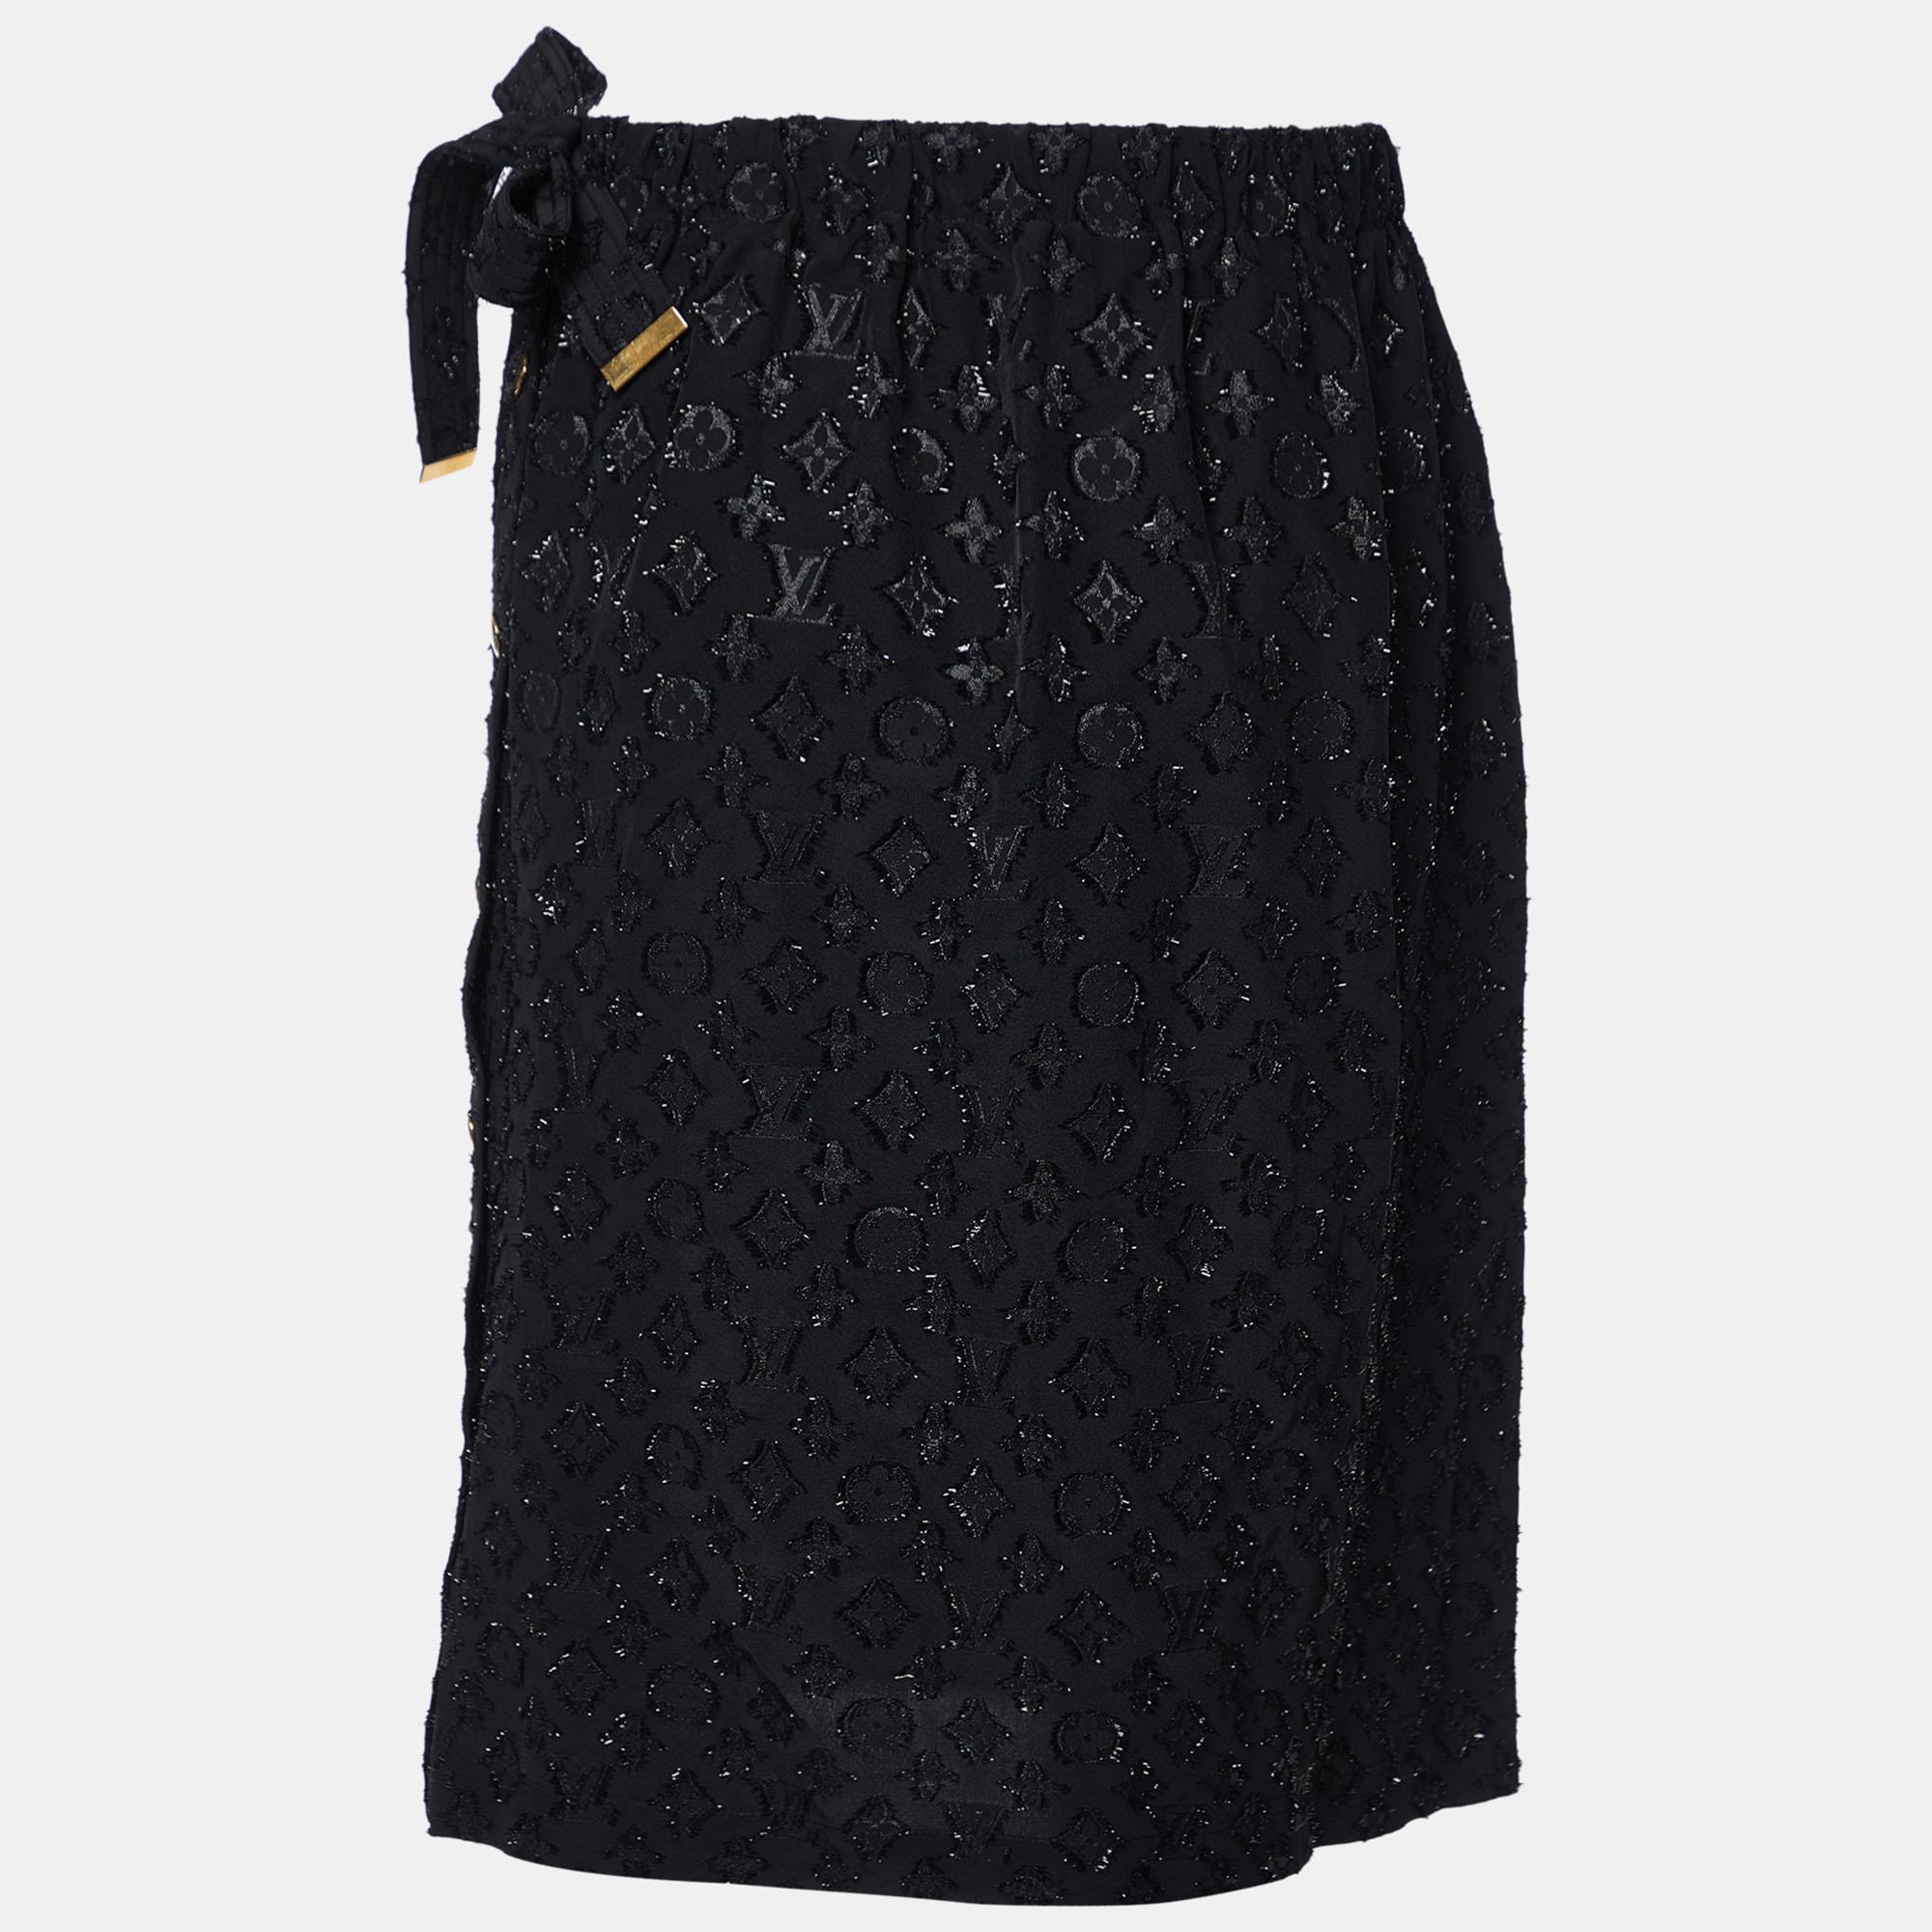 This lovely skirt is beautifully stitched from fine fabric. The comfy designer skirt has a flattering silhouette. Pair it with a simple top and strappy heels for a chic look.

